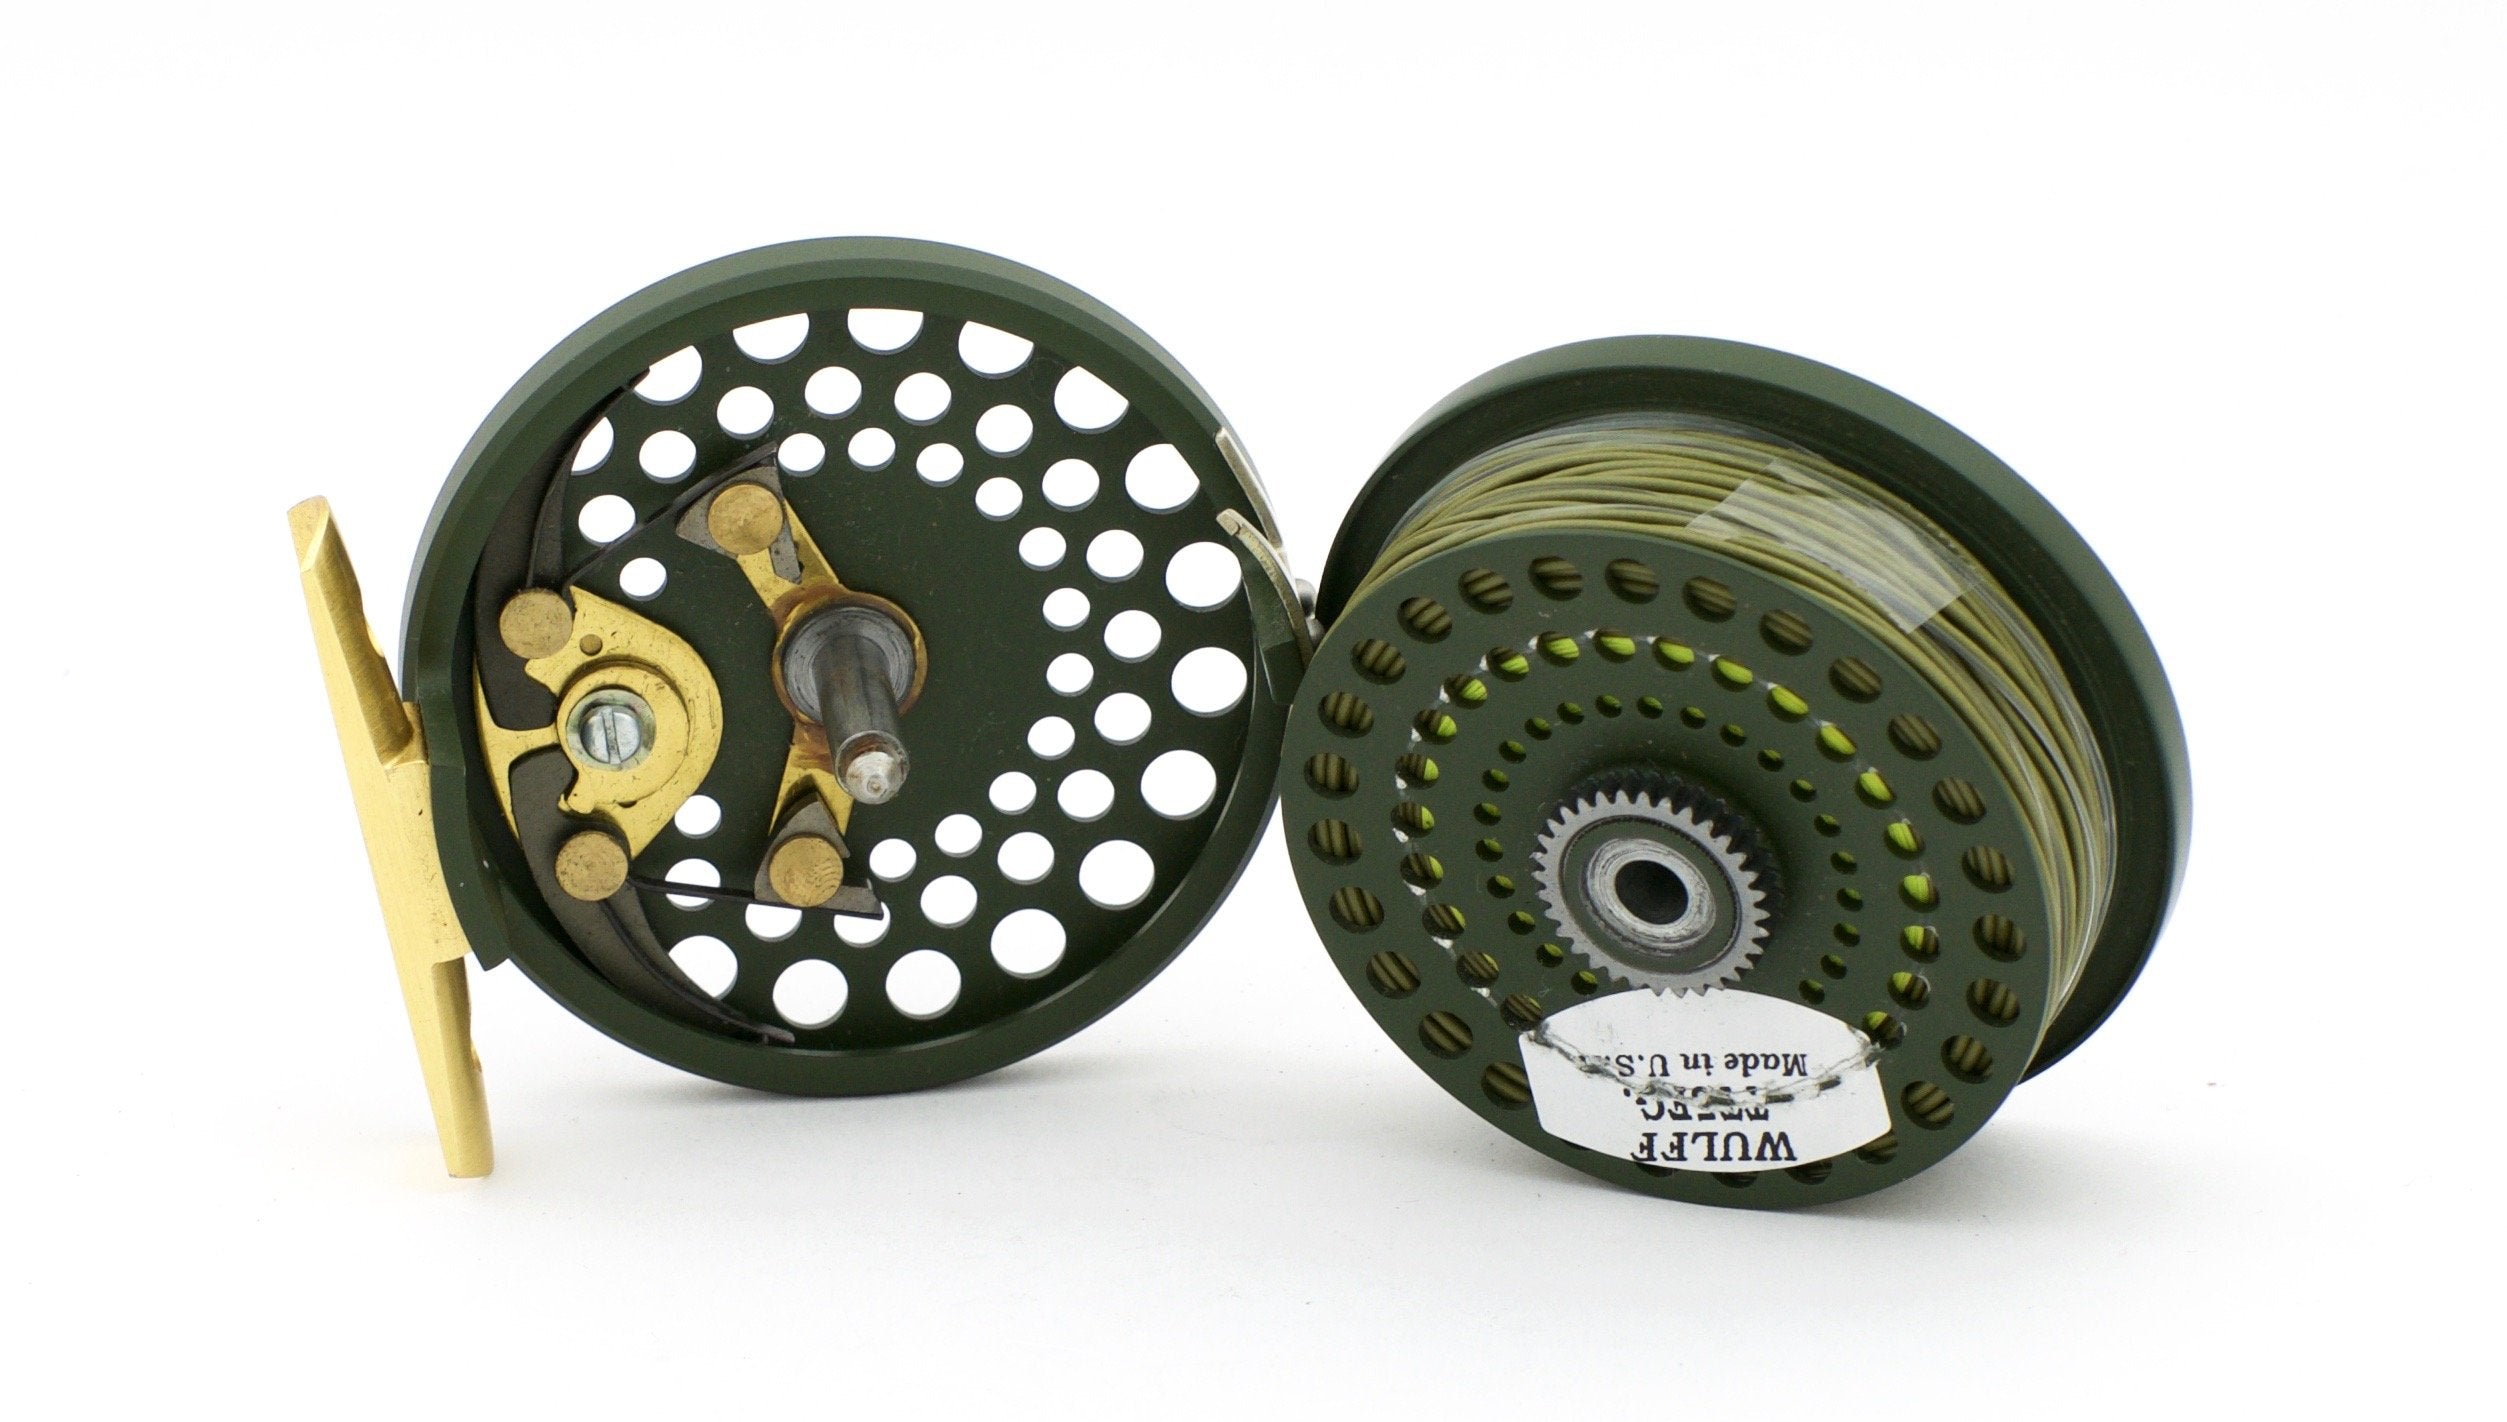 Orvis CFO III fly fishing reel made in England with spare spool